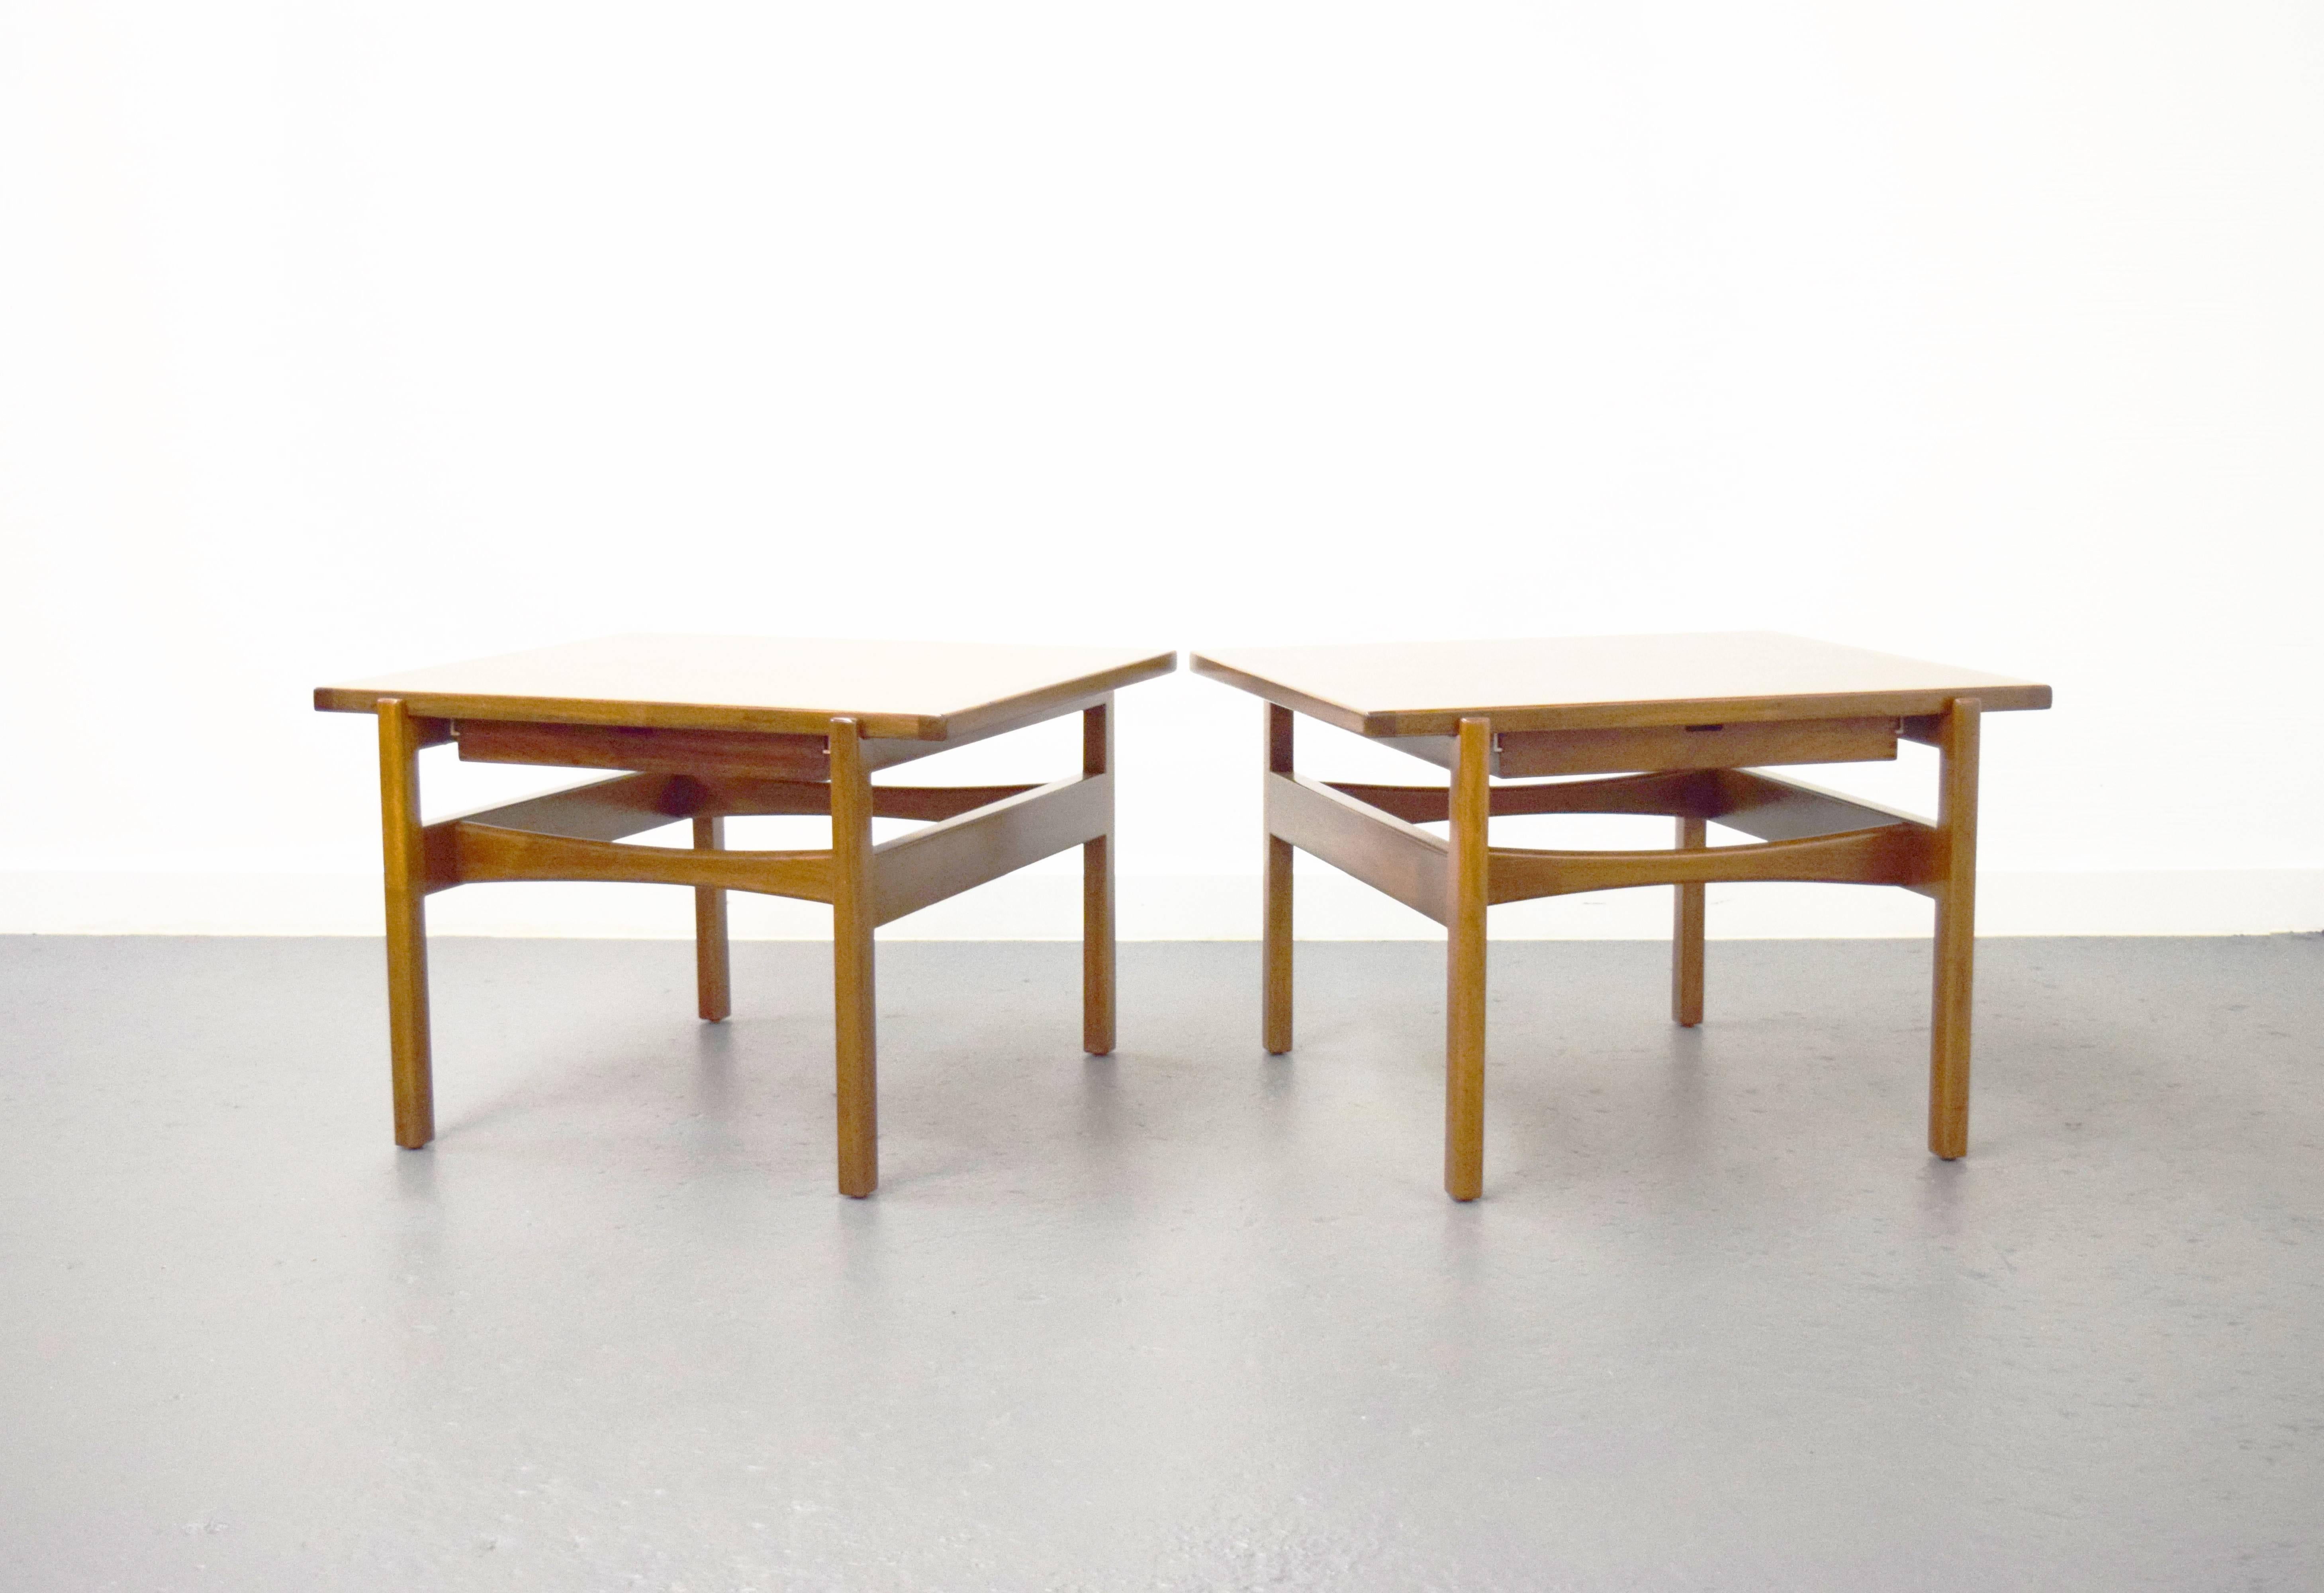 Pair of Jens Risom end / side tables. Surface floats on sculptural frame. Hidden drawer with dovetailing detail.